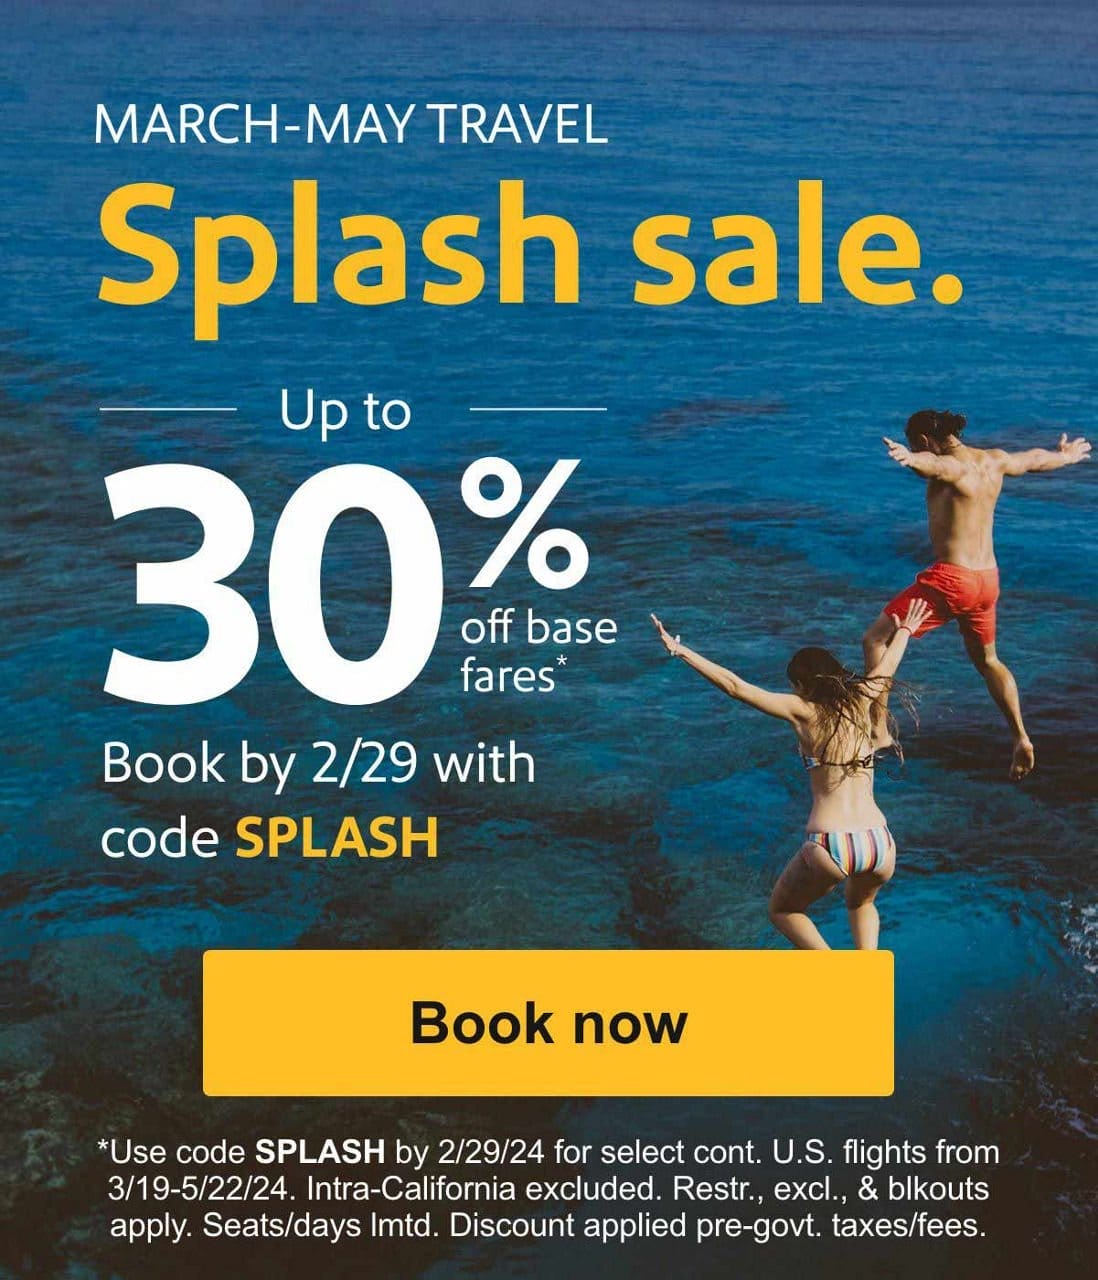  MARCH-MAY TRAVEL\u202f Splash sale. Up to 30% off base fares* Book by 2/29/24 with code SPLASH Book now *Use code\u202fSPLASH\u202fby 2/29/24 for select cont. U.S. flights from 3/19-5/22/24. Intra-California excluded. Restr., excl., & blkouts apply. Seats/days lmtd.\u202fDiscount applied pre-govt. taxes/fees.